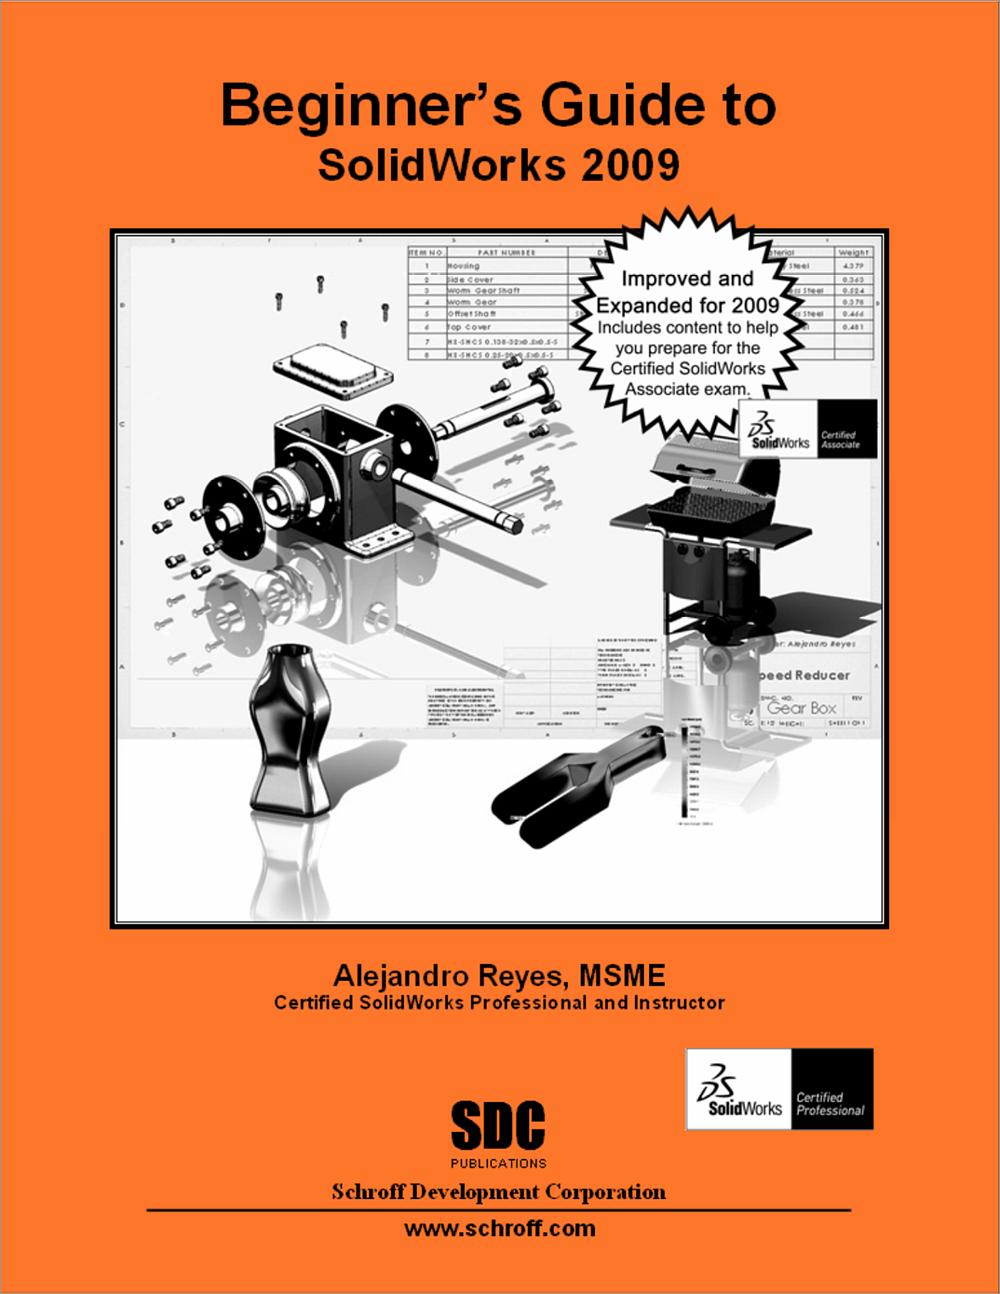 levels of solidworks certification